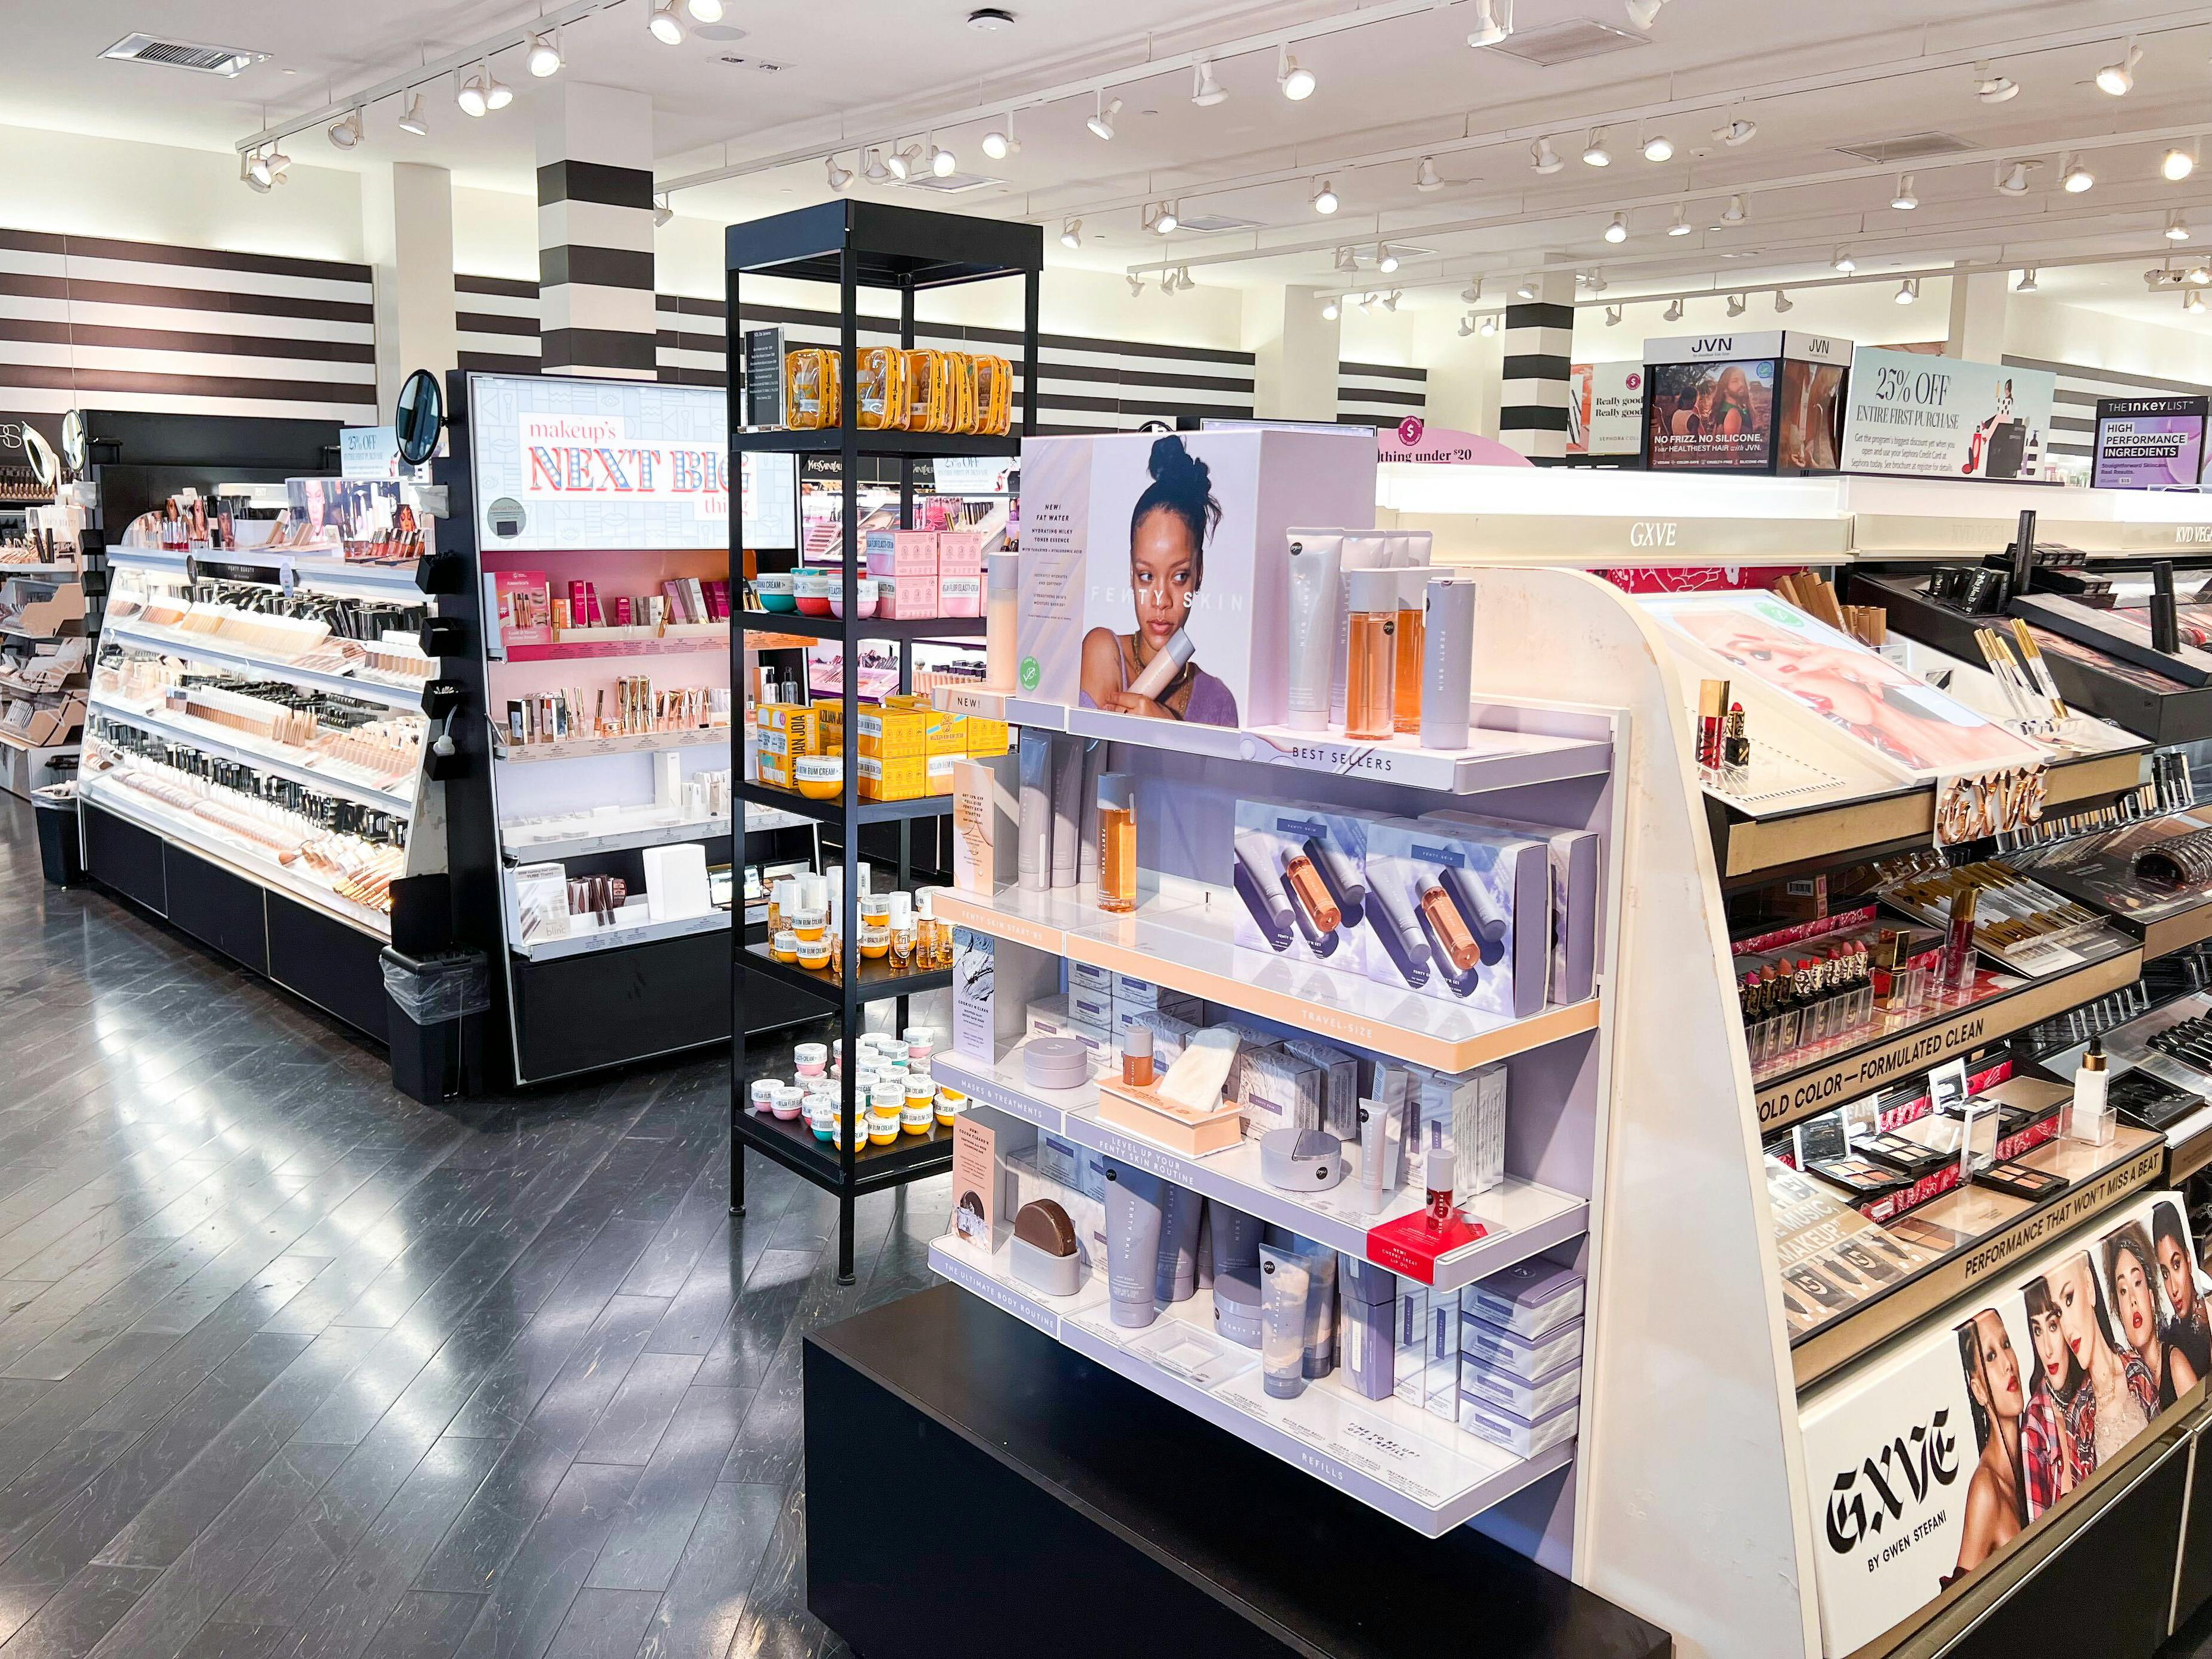 Insider Sephora Hacks: Promos, Events, and More - The Krazy Coupon Lady